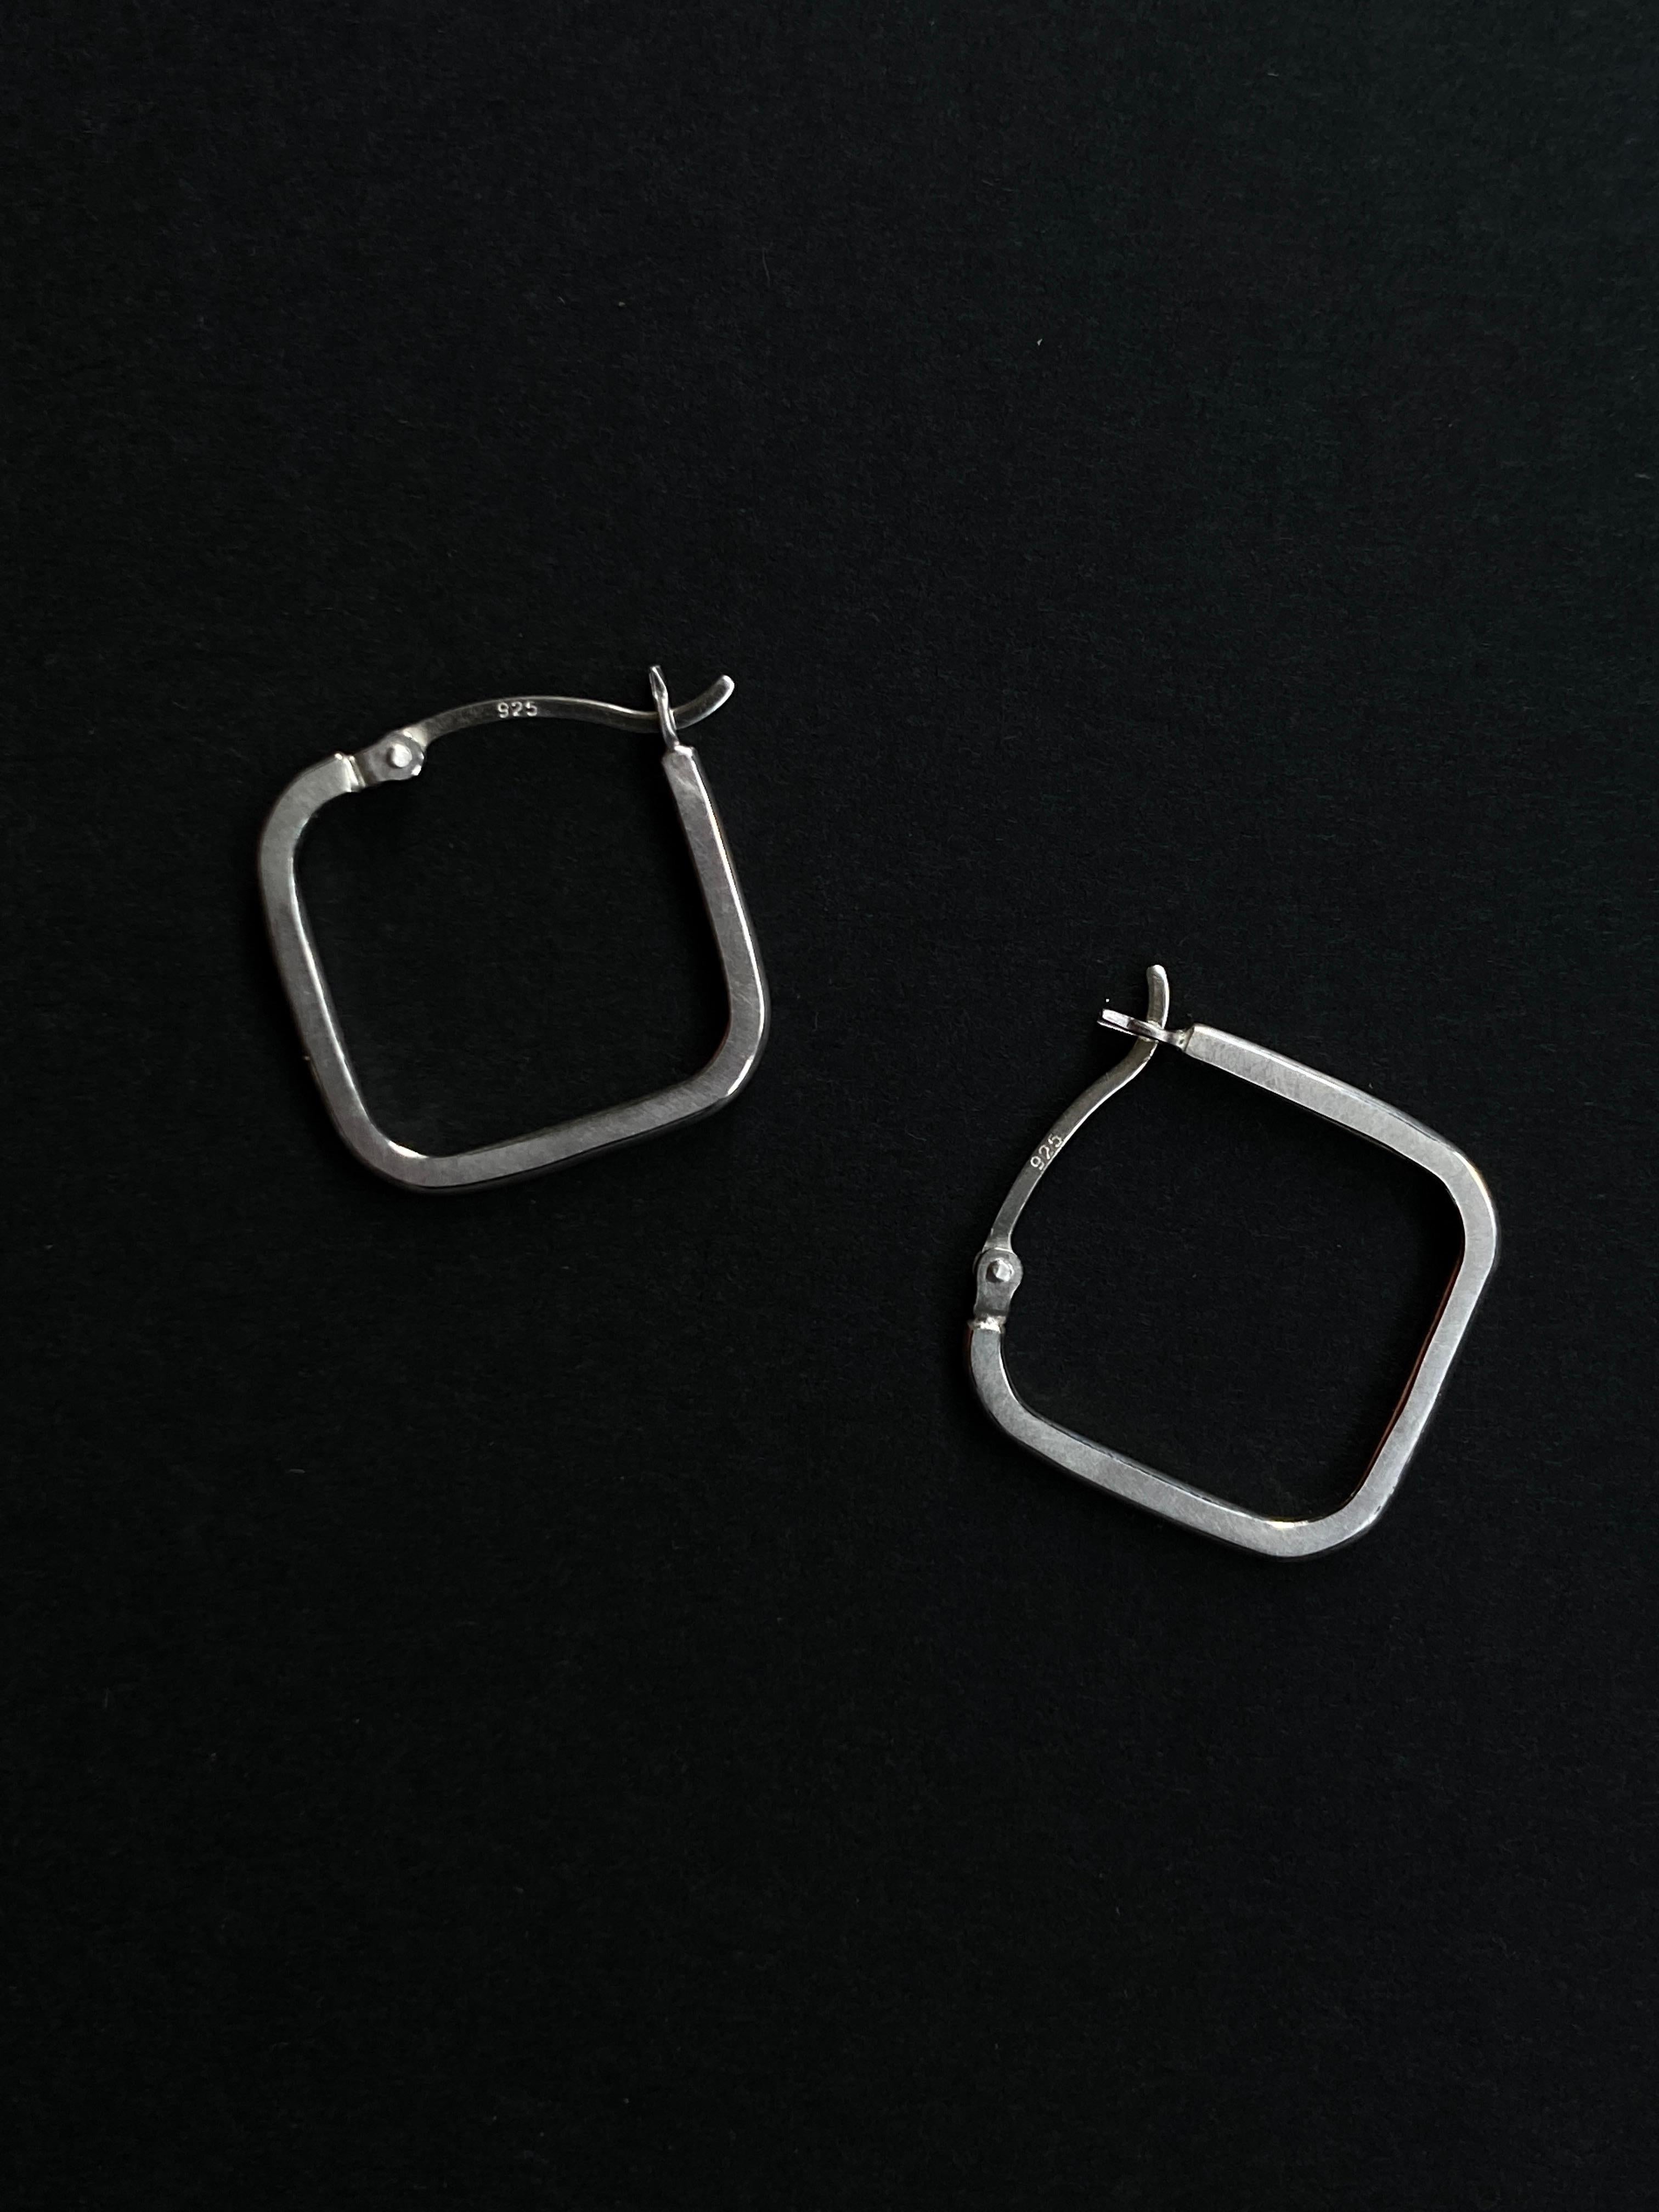 These lightweight earrings are a perfect alternative to standard pair of everyday hoops.
They are made in silver wire and are finished with a matte sheen with burnished edges to catch the light when worn.

They come with a creole fitting, fastening